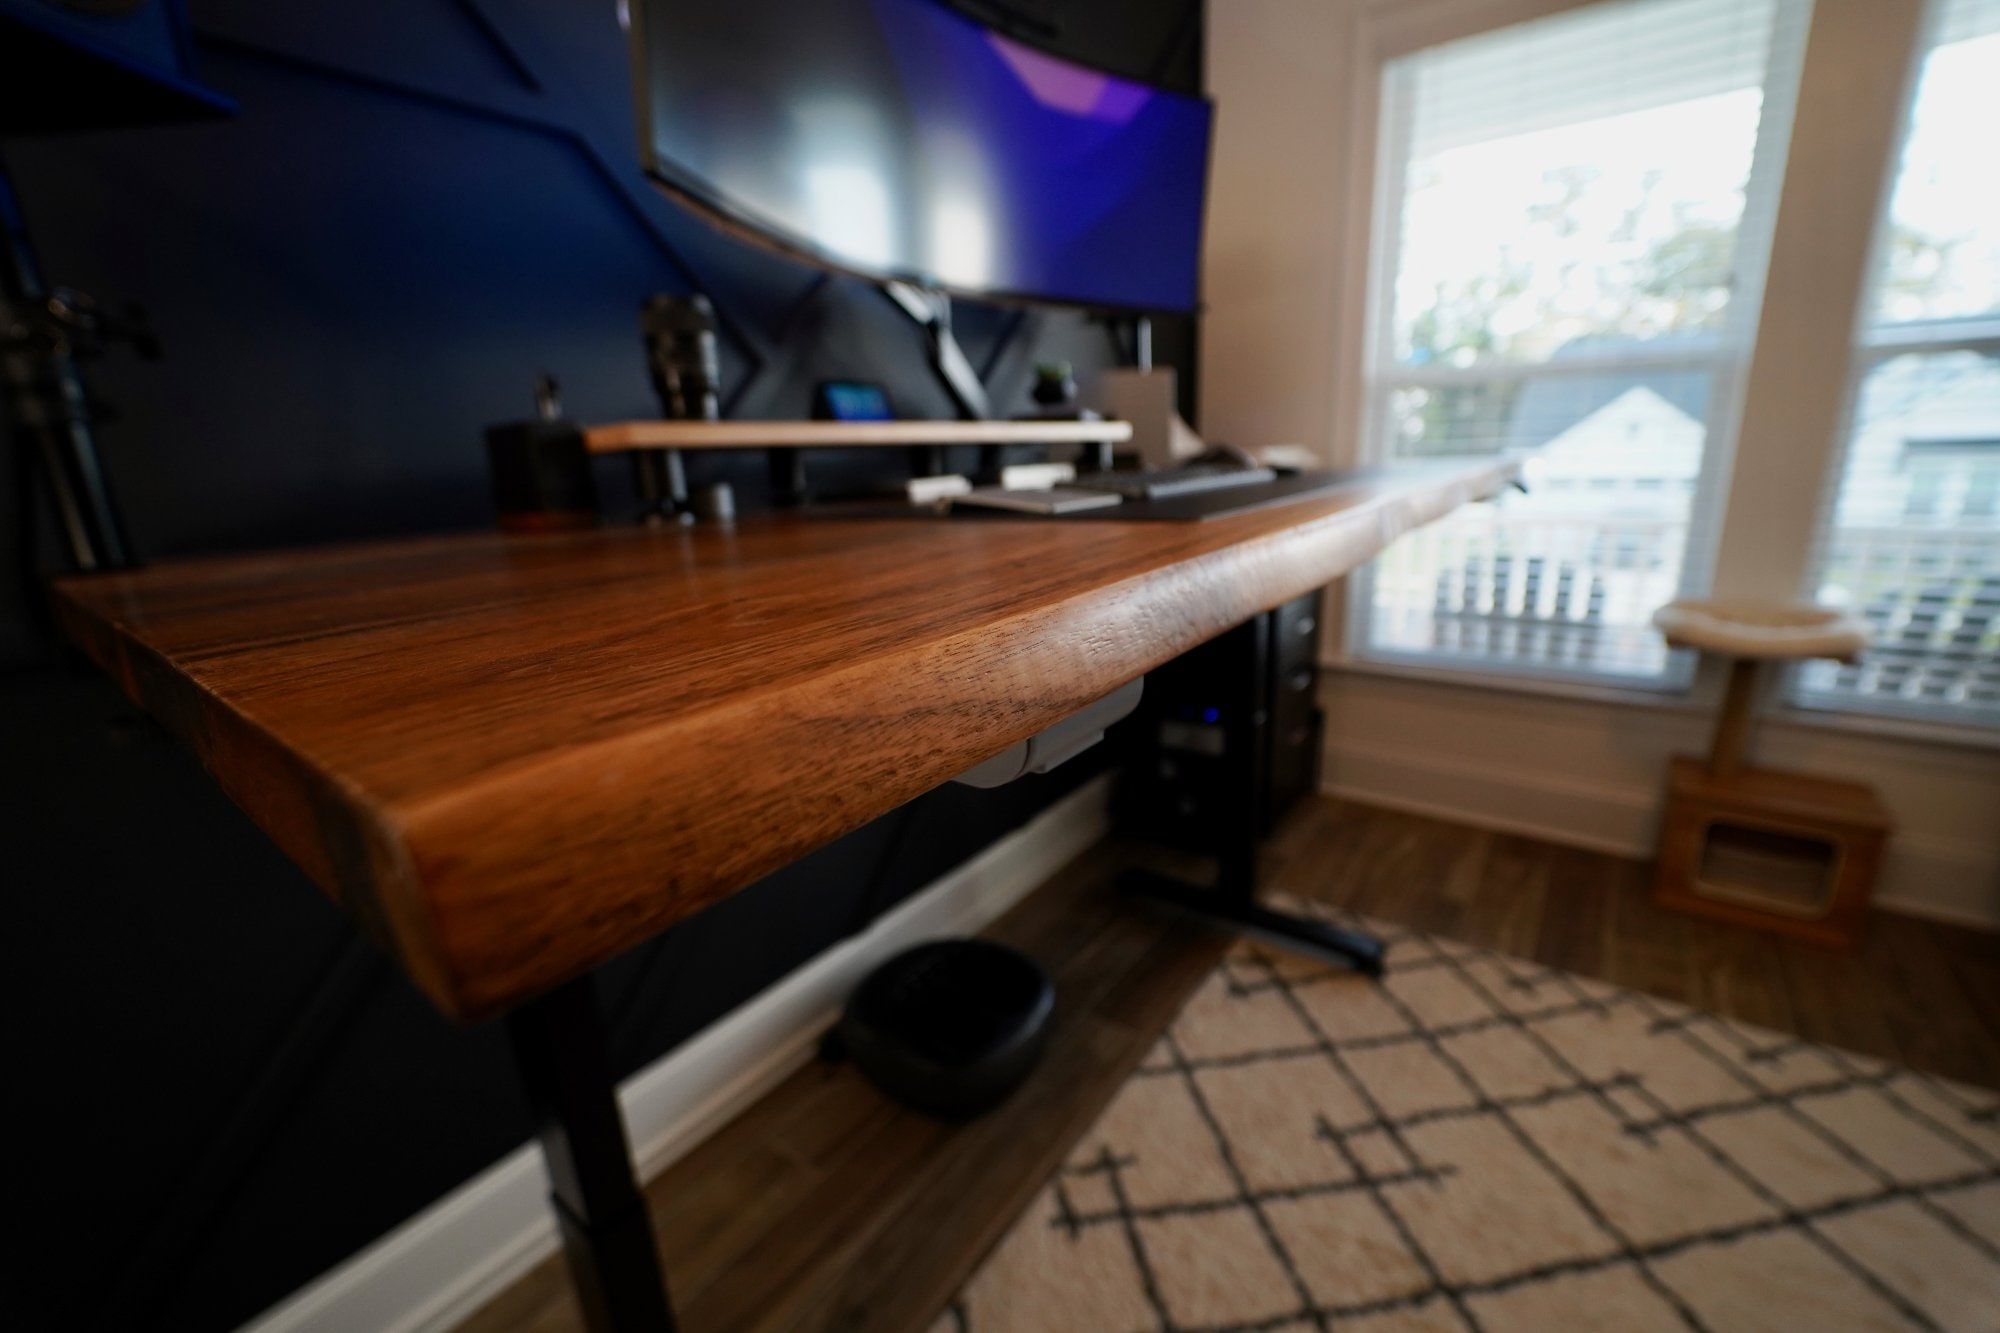 An angle view of a desk setup featuring an island countertop from Home Depot by the window